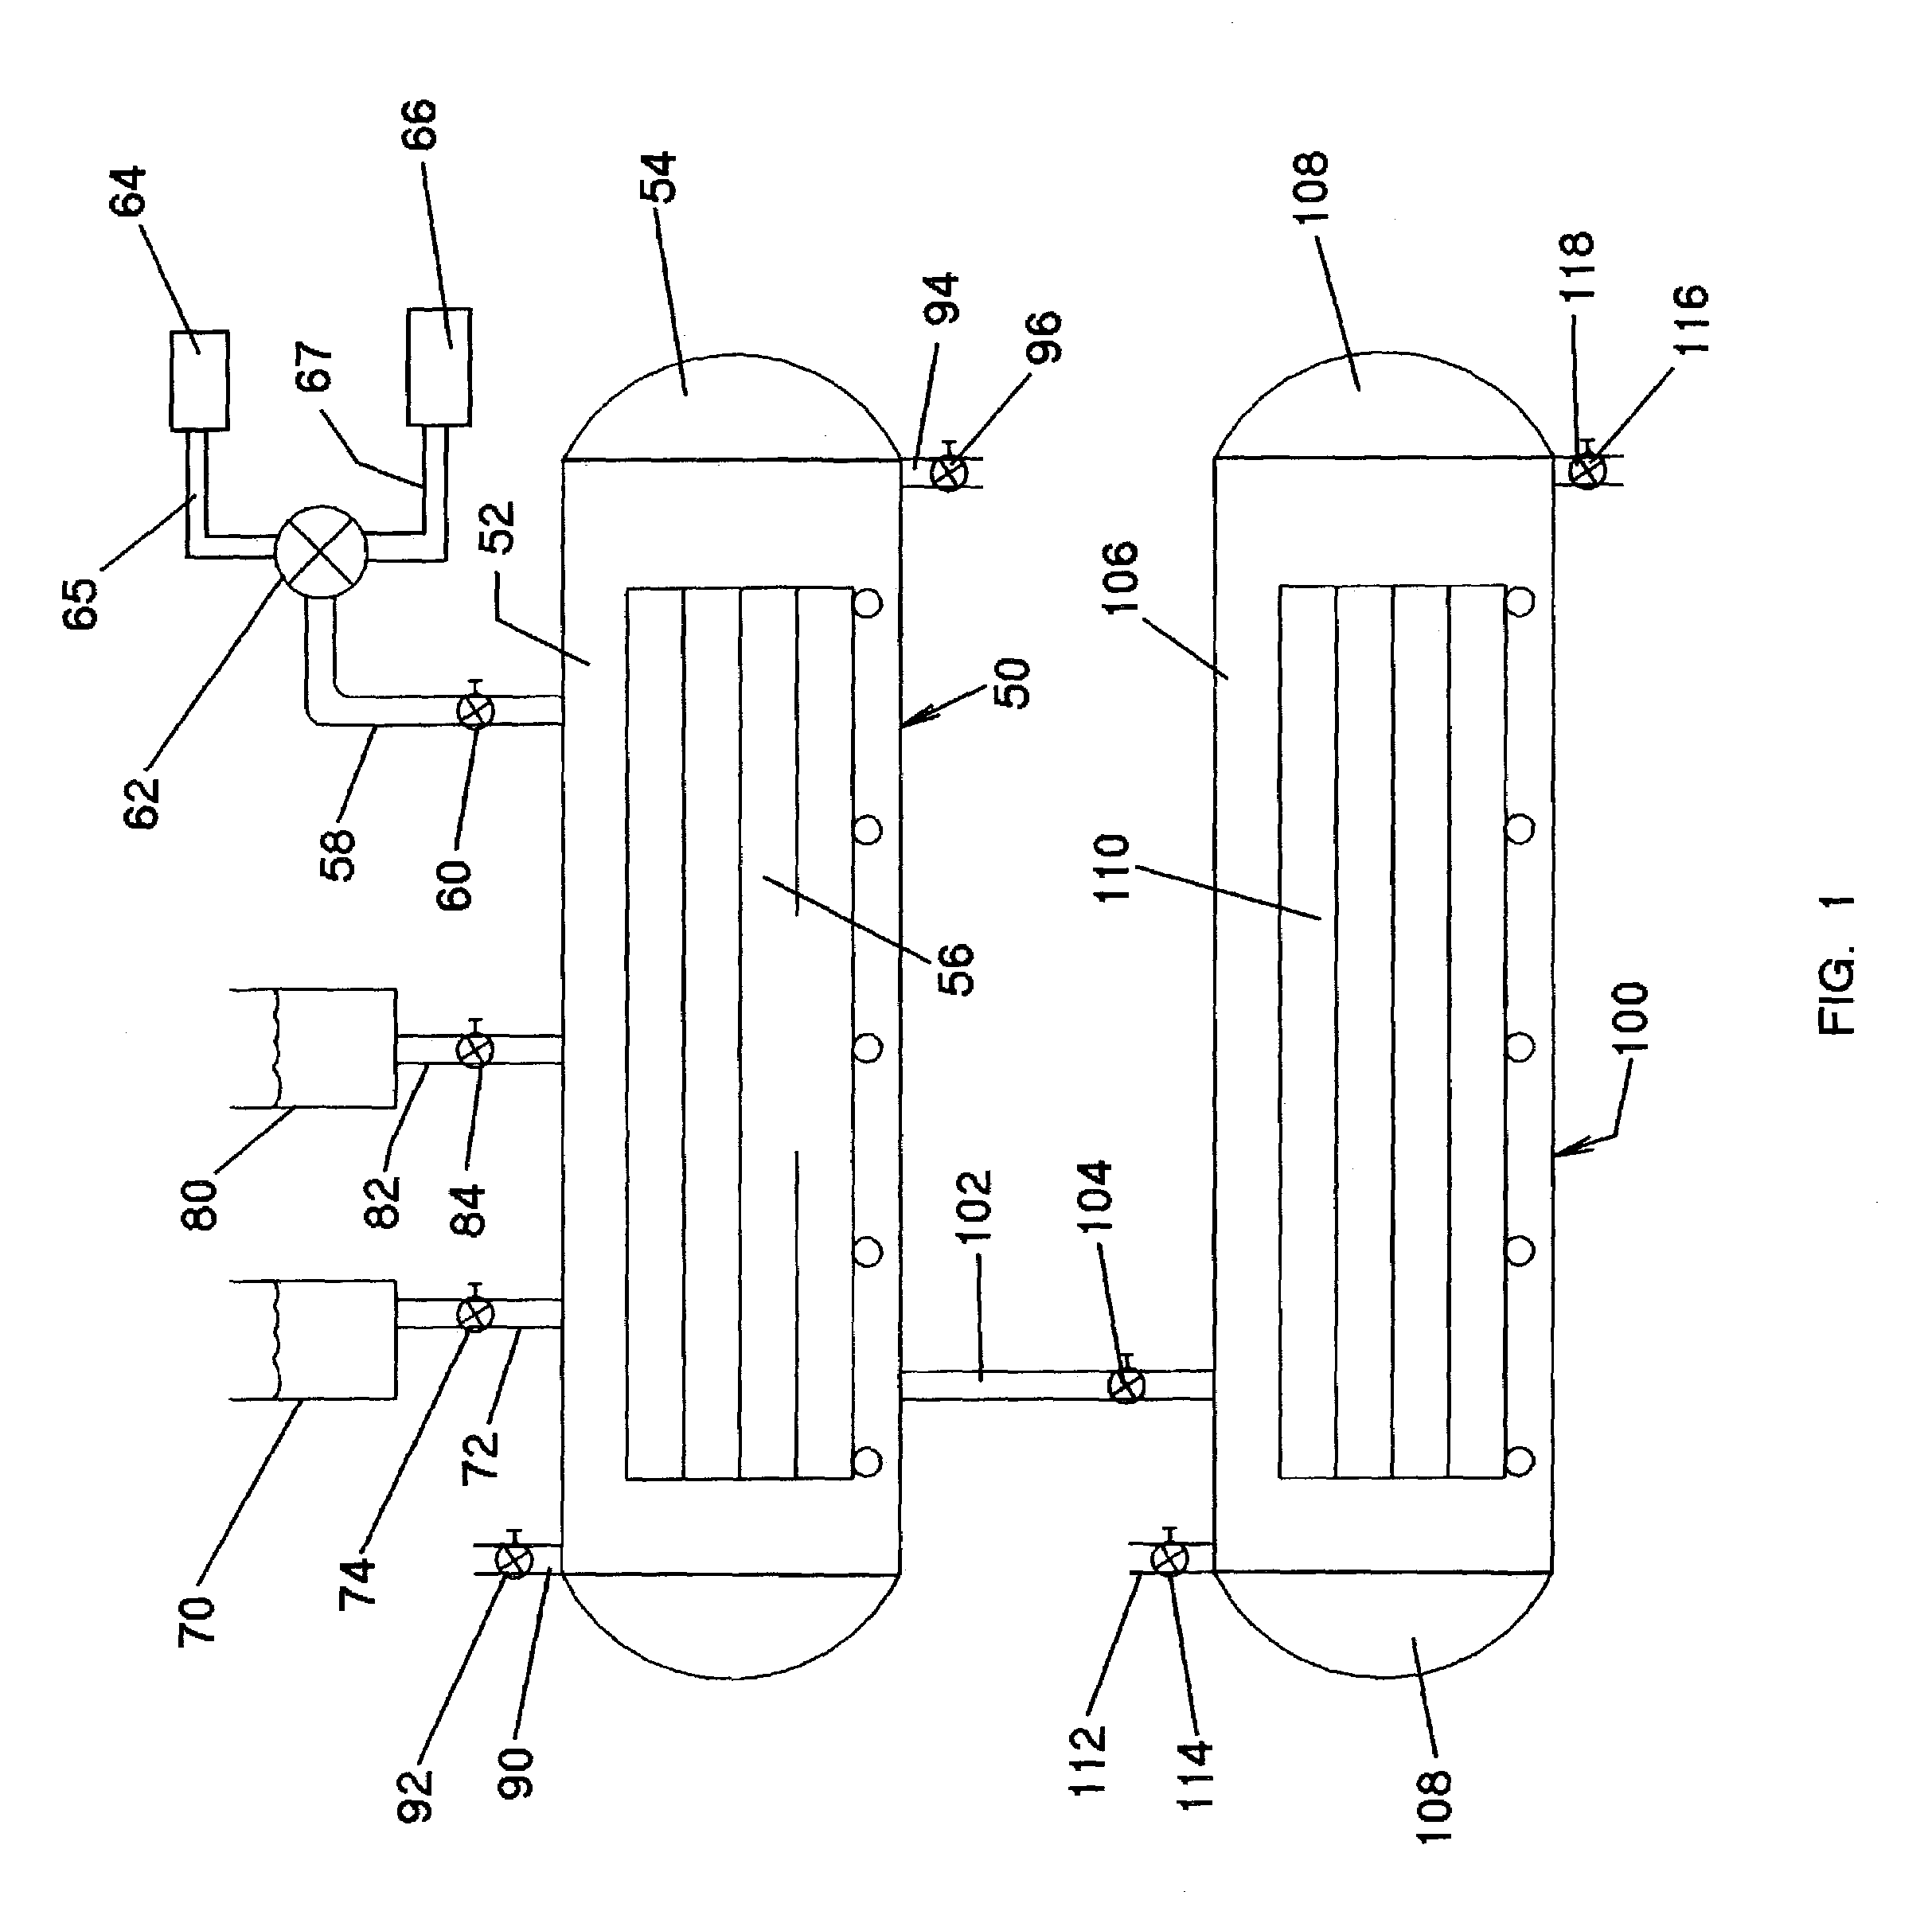 Method of increasing latent heat storage of wood products